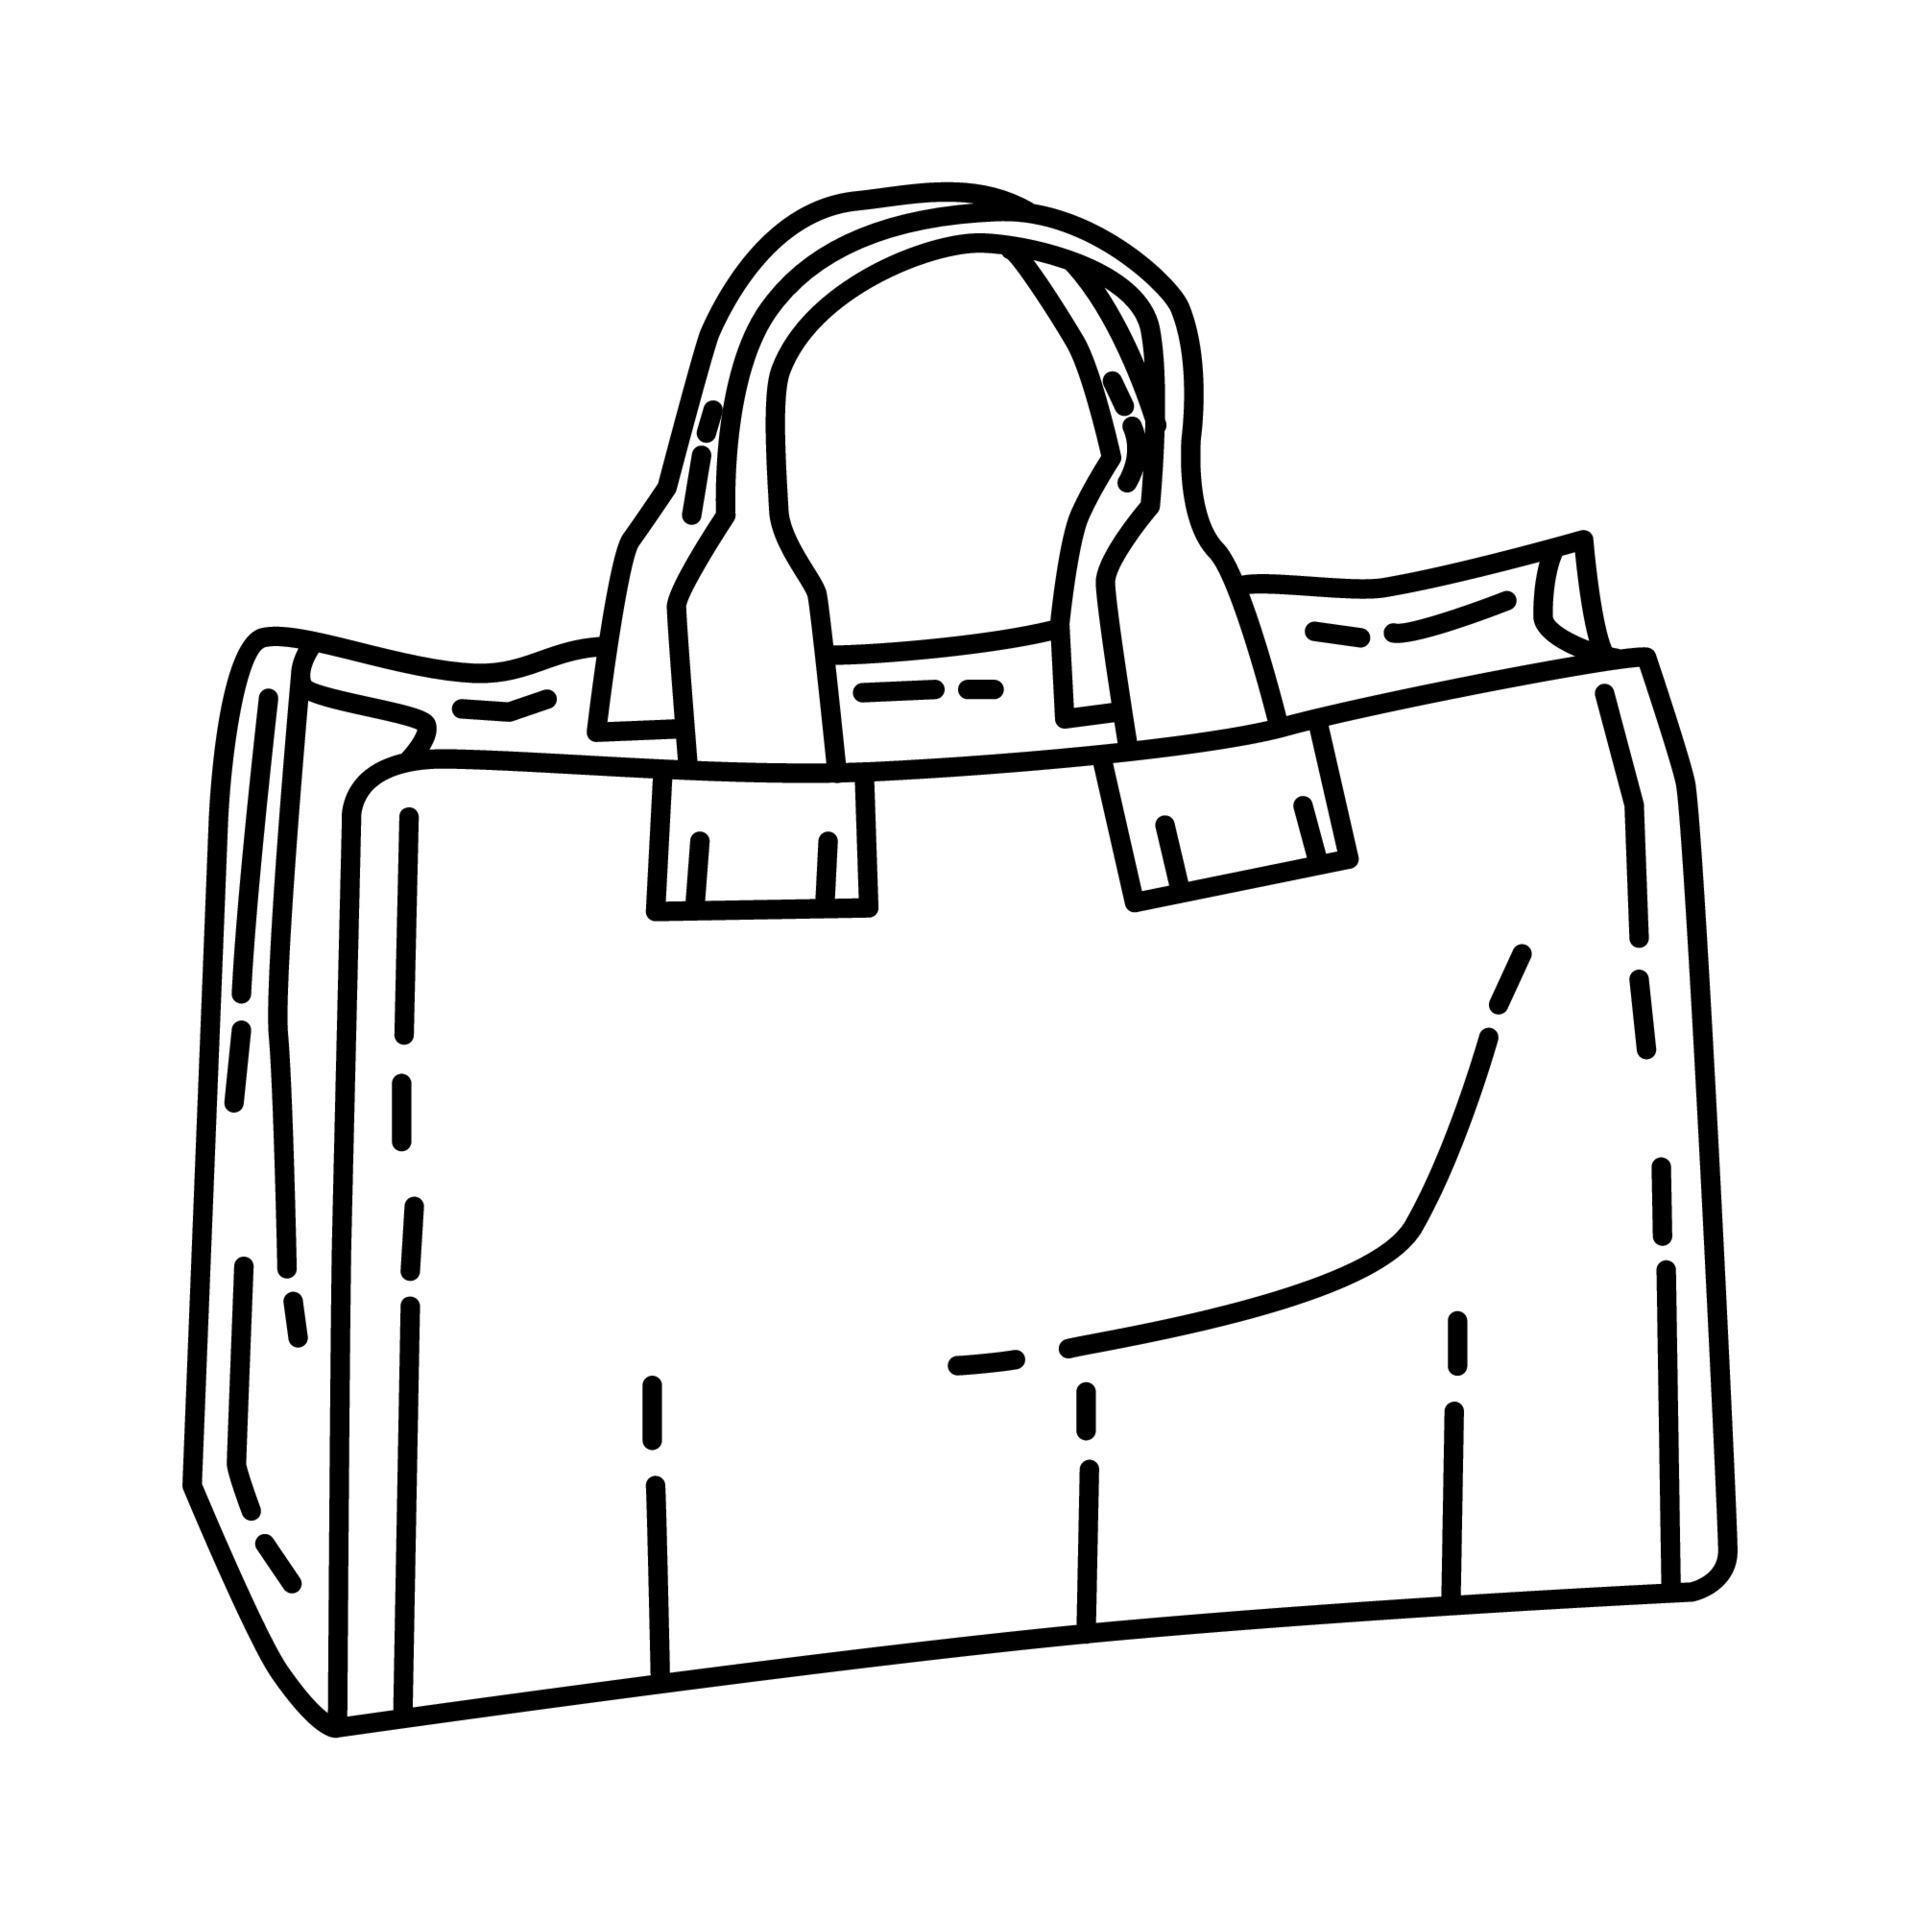 Leather Handbag Icon. Doodle Hand Drawn or Outline Icon Style 4474212 ...